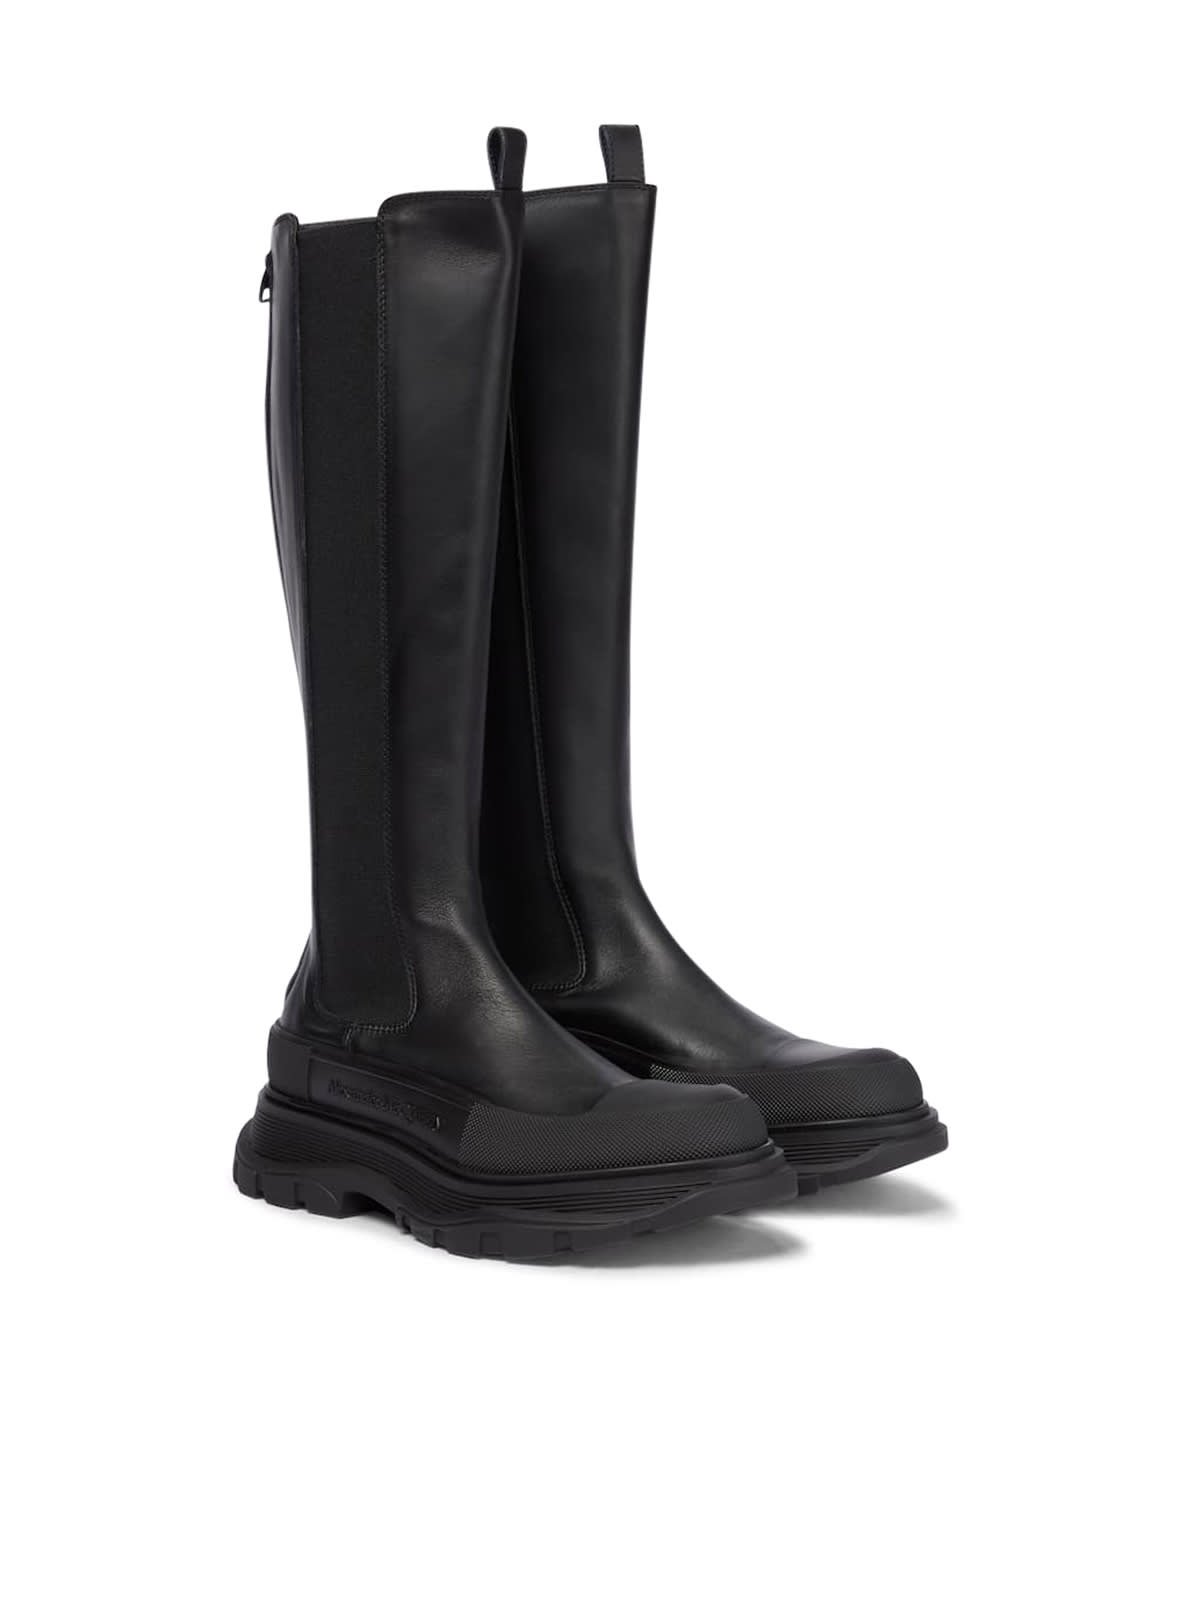 Buy Alexander McQueen Leather And Rubber Half Boot online, shop Alexander McQueen shoes with free shipping